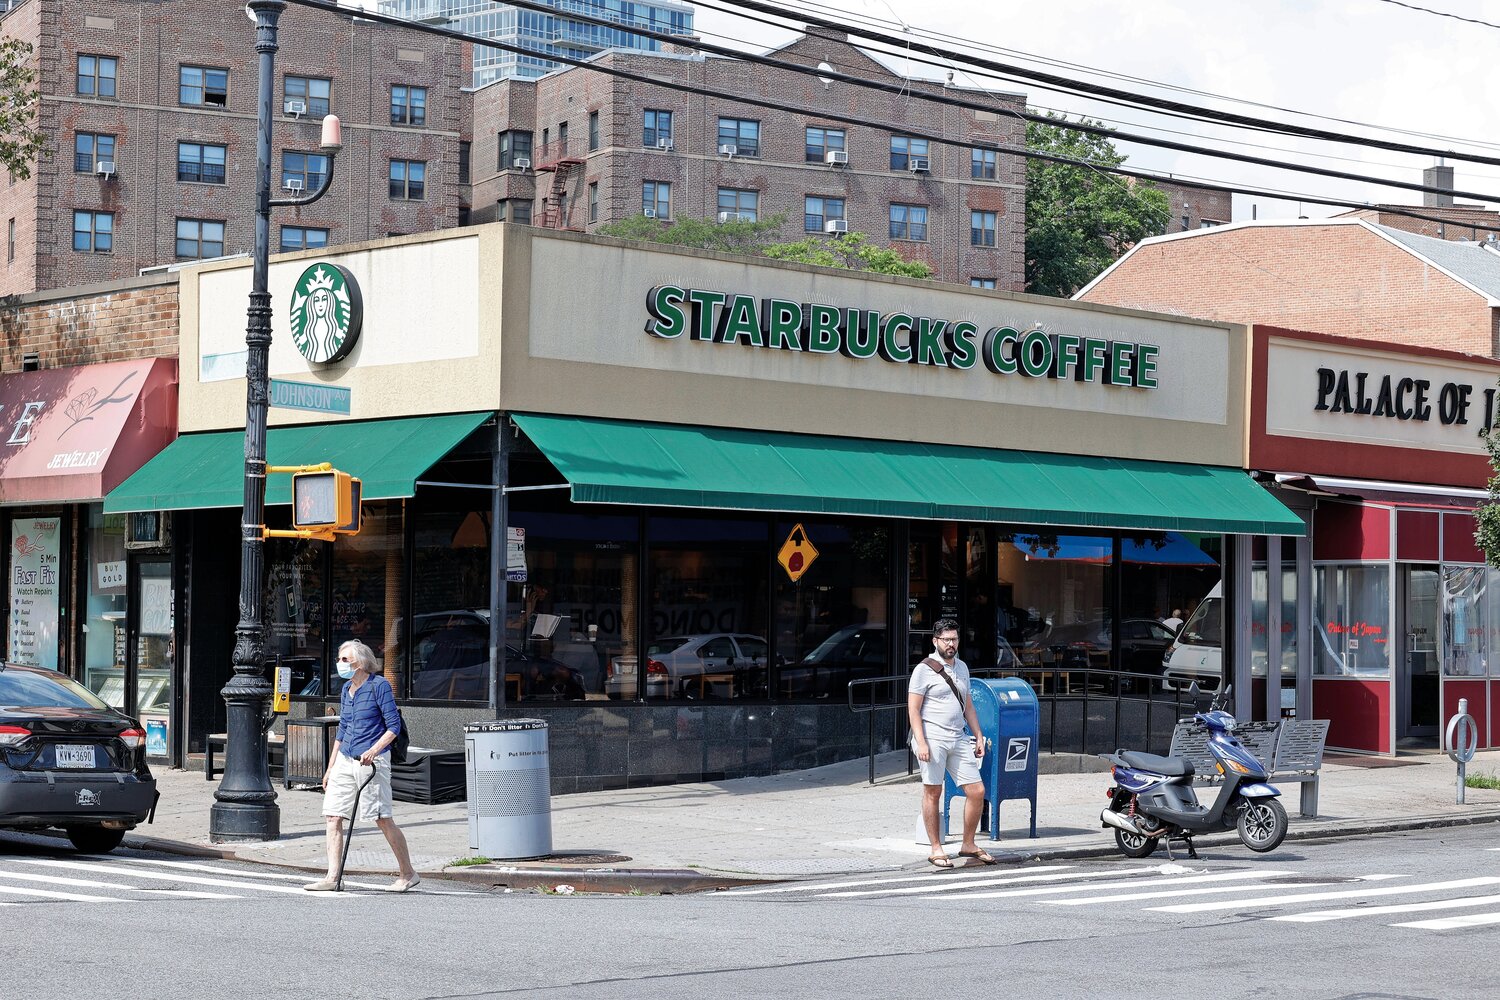 The Starbucks at the corner of Johnson Avenue and West 235th Street on Monday, Sept. 11 was the site of a raccoon that was stuck in the café’s air ducts just a week before. Employees heard scratching noises coming from above and discovered the raccoon.